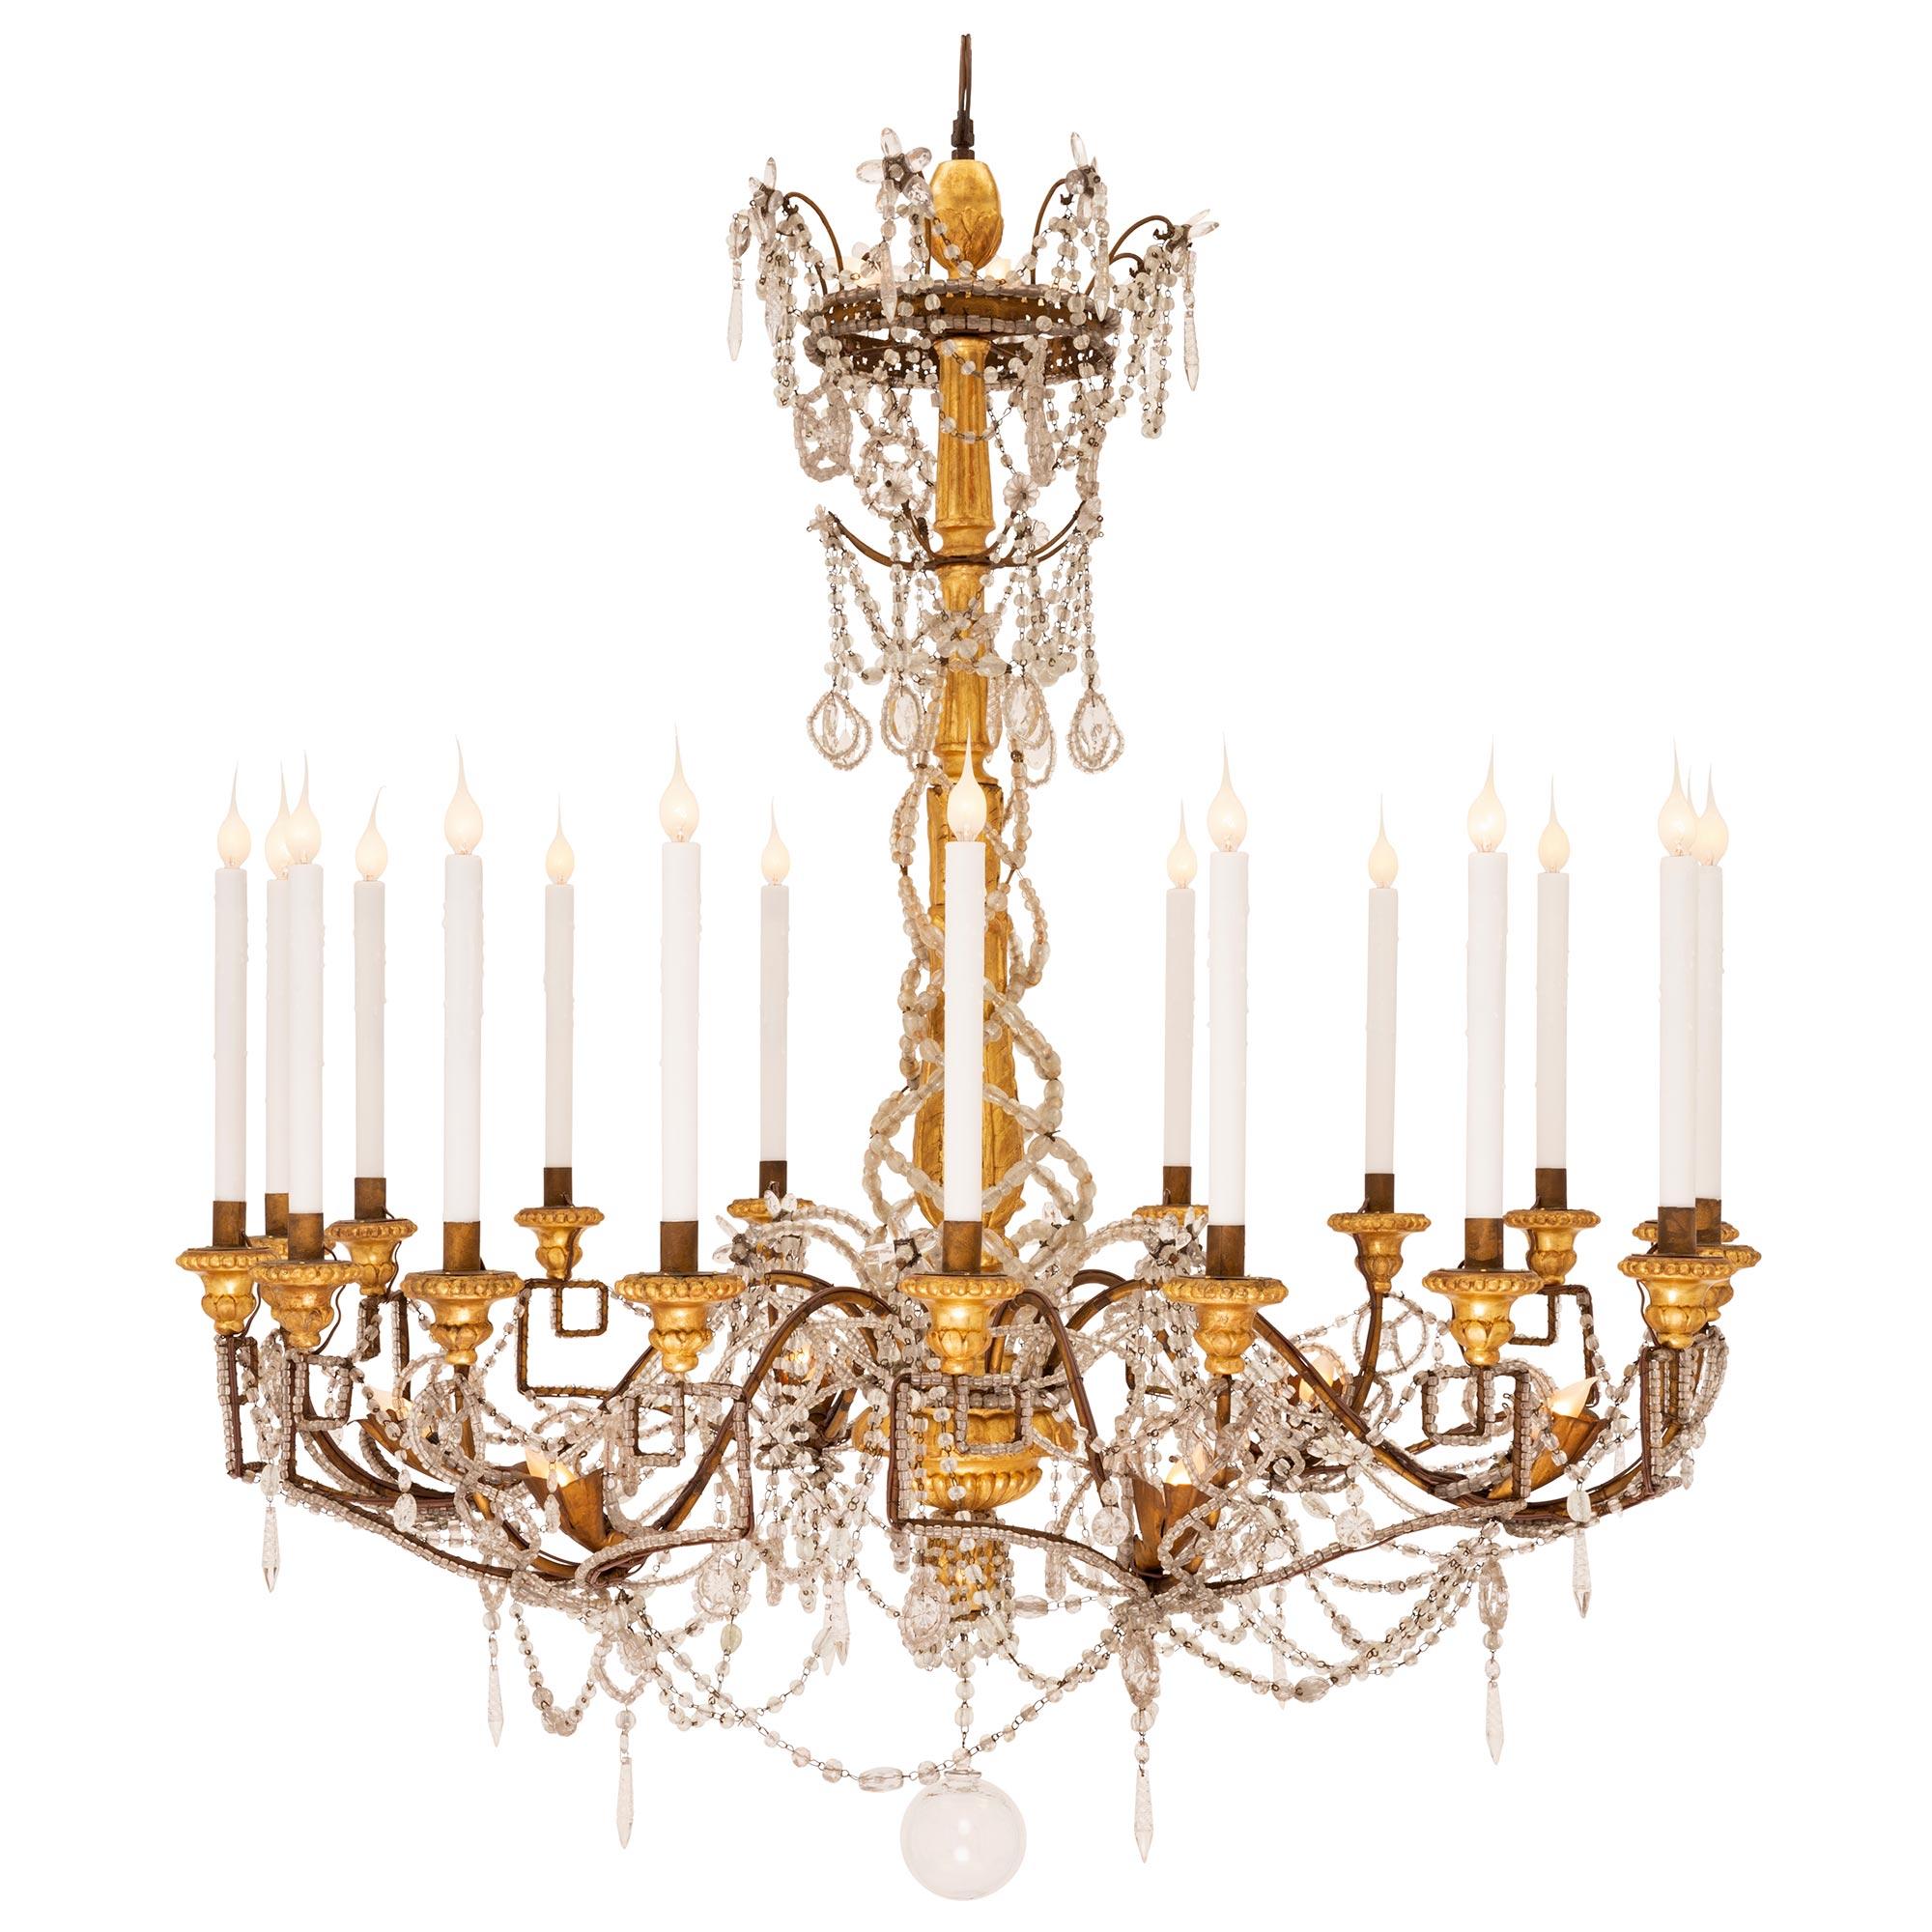 A stunning and extremely unique Italian 18th century Louis XVI period giltwood, gilt metal crystal, and cut glass chandelier, from Turin. The large scale eighteen arm and twenty eight light chandelier is centered by a lovely hand blown bottom glass